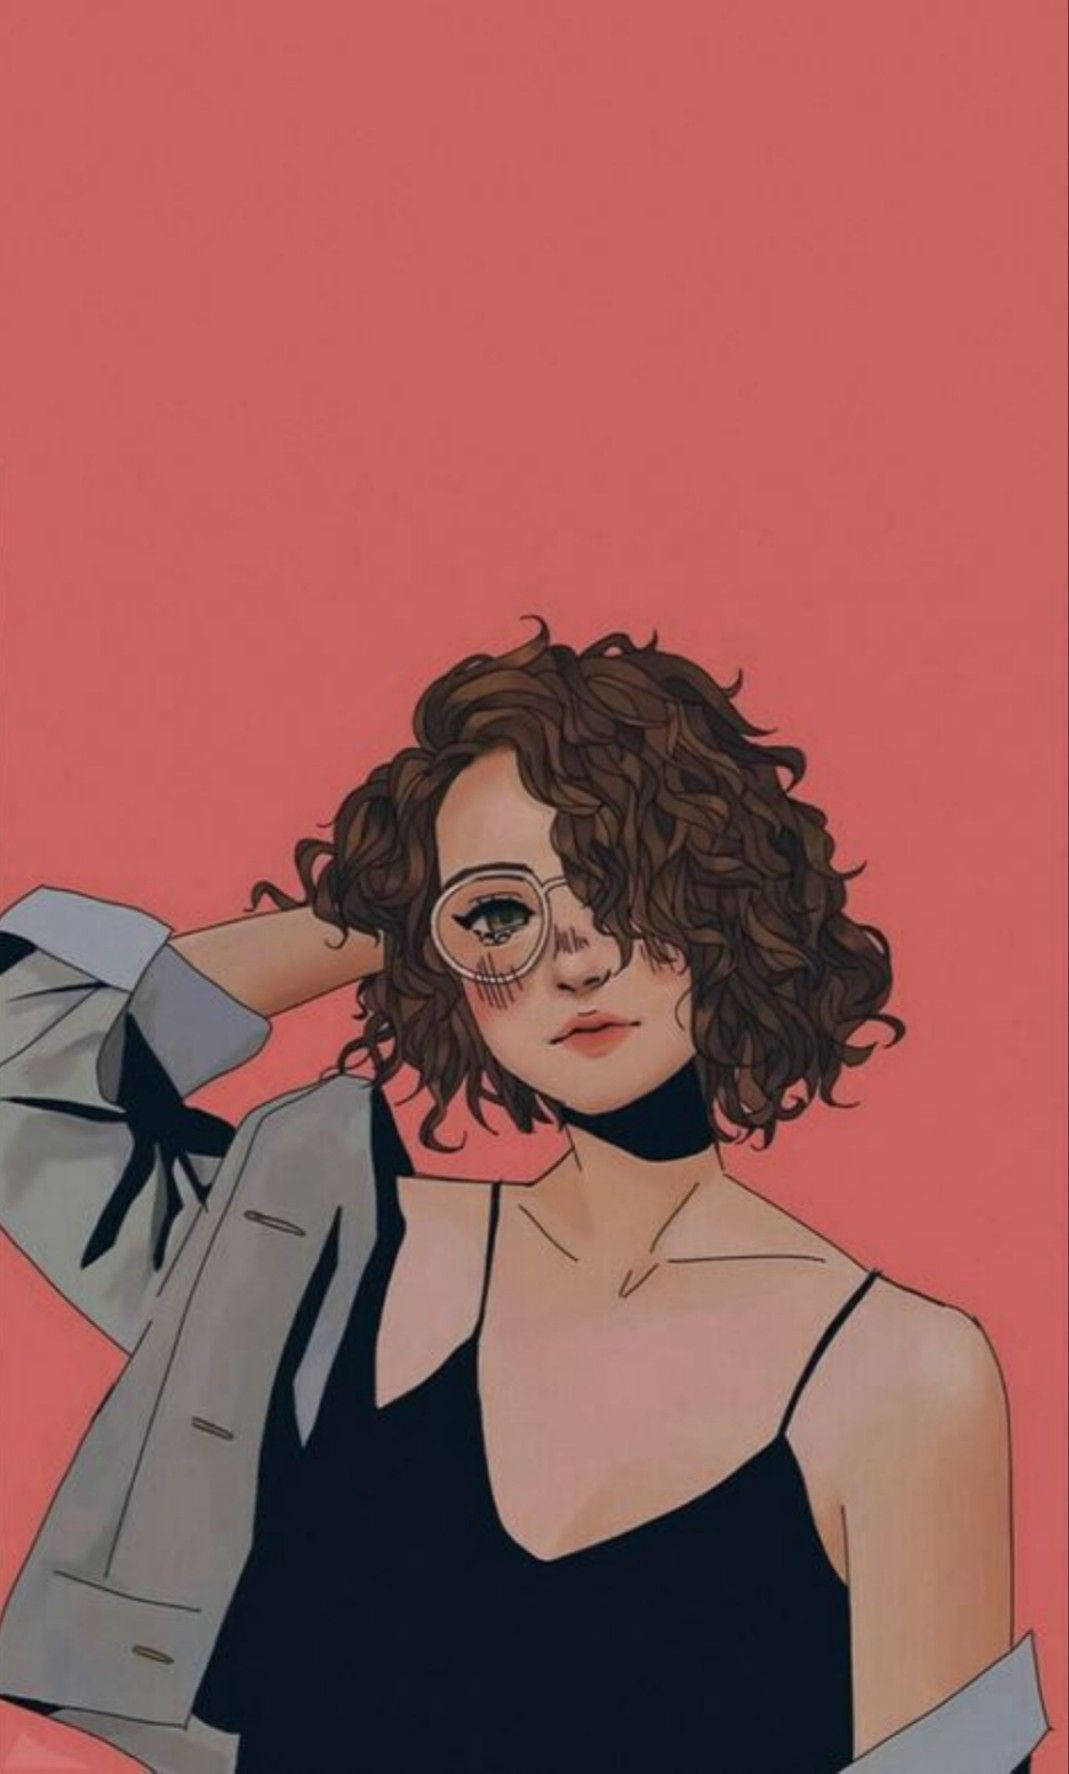 Animated Woman With Short Curly Hair Wallpaper